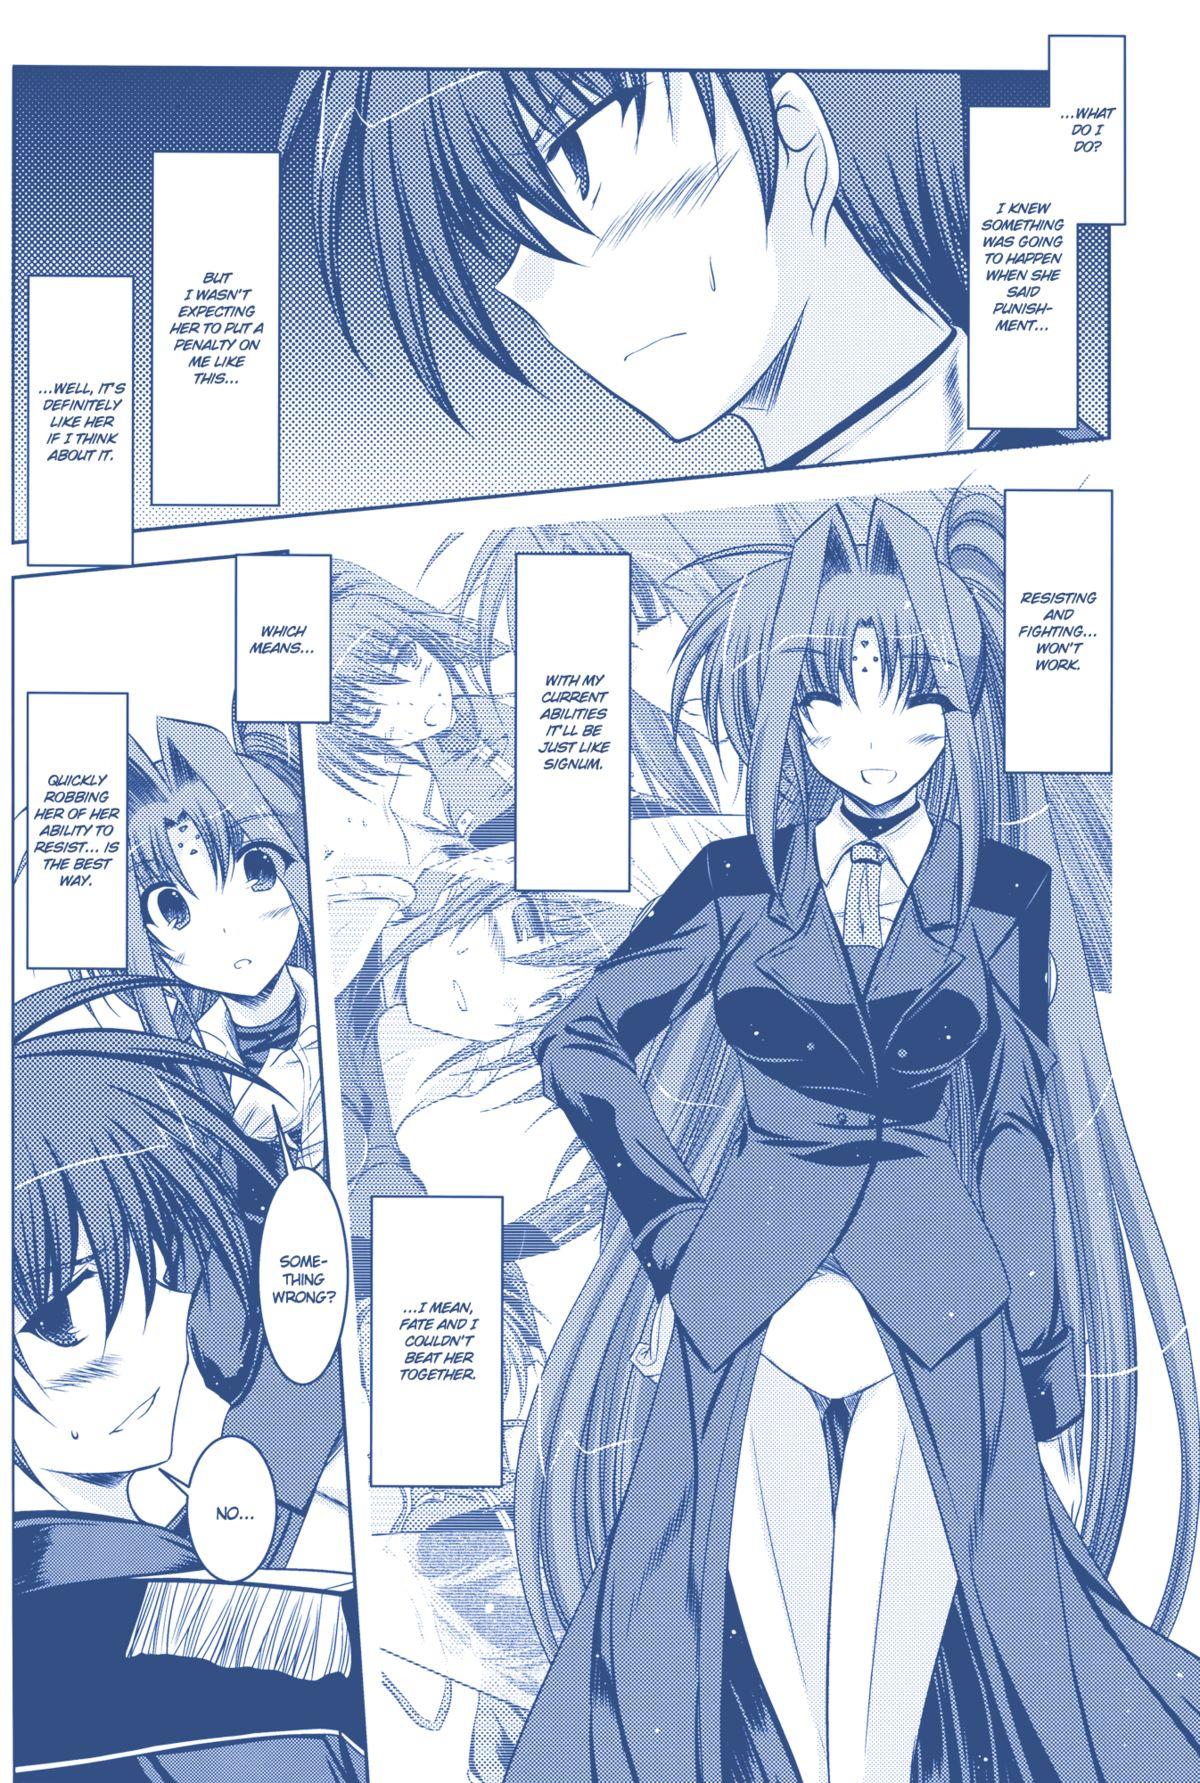 From ANOTHER FRONTIER 02 Magical Girl Lyrical Lindy-san #03 - Mahou shoujo lyrical nanoha Gemendo - Page 12